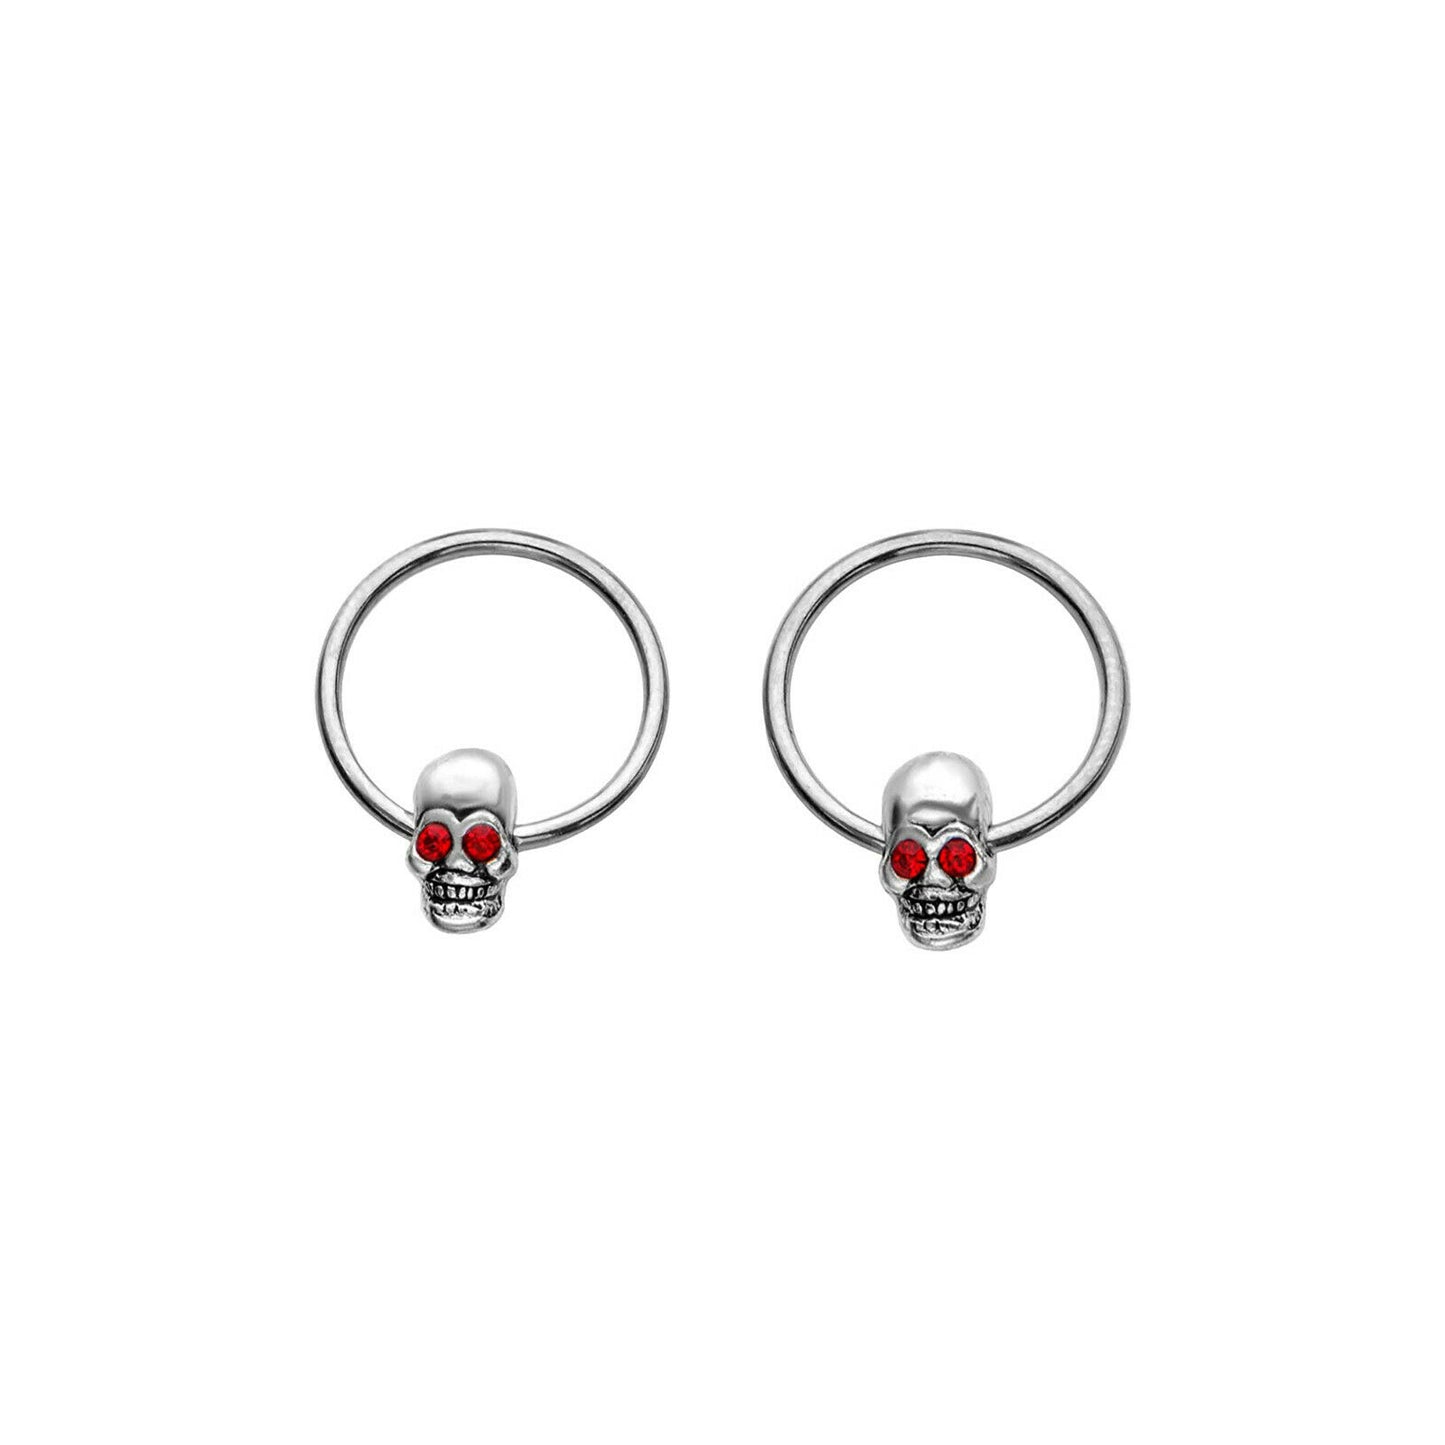 Captive Bead ring Ring BCR 16 gauge 3/8" 10 mm Surgical steel with red eye skull